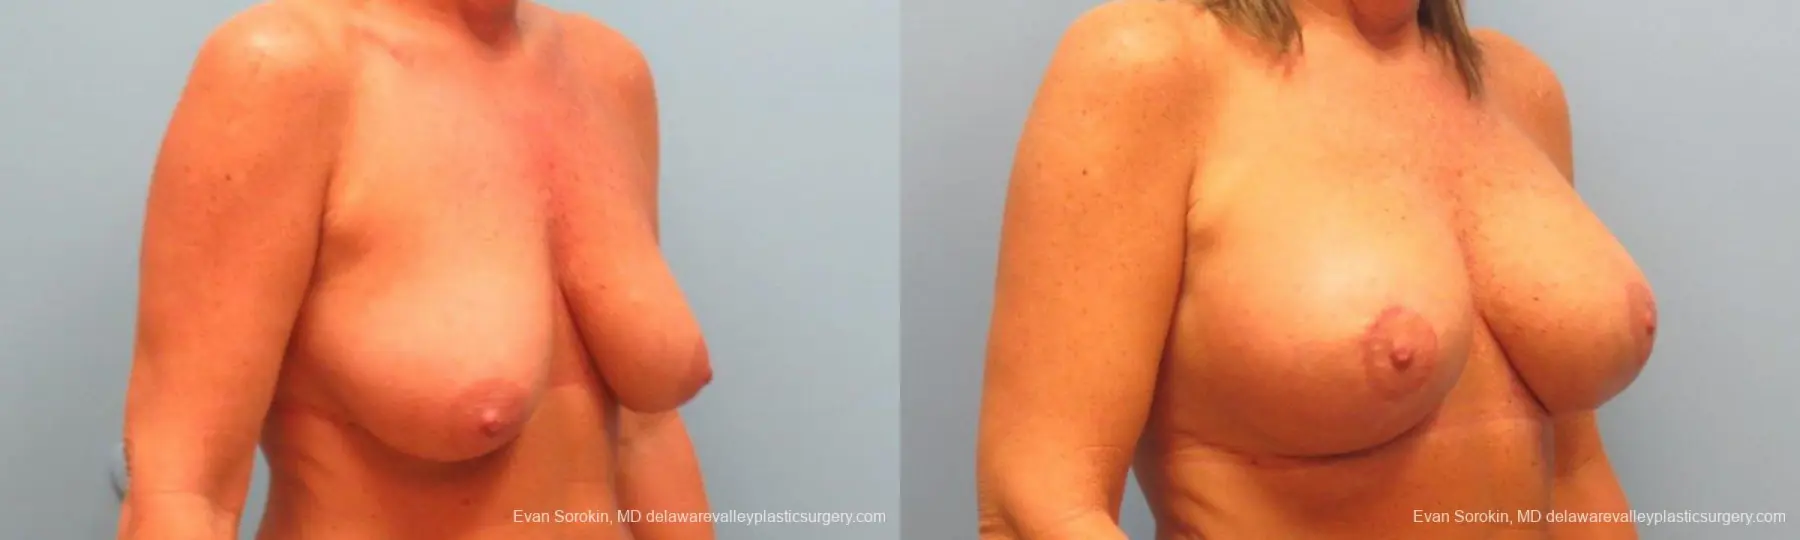 Philadelphia Breast Lift and Augmentation 9398 - Before and After 2